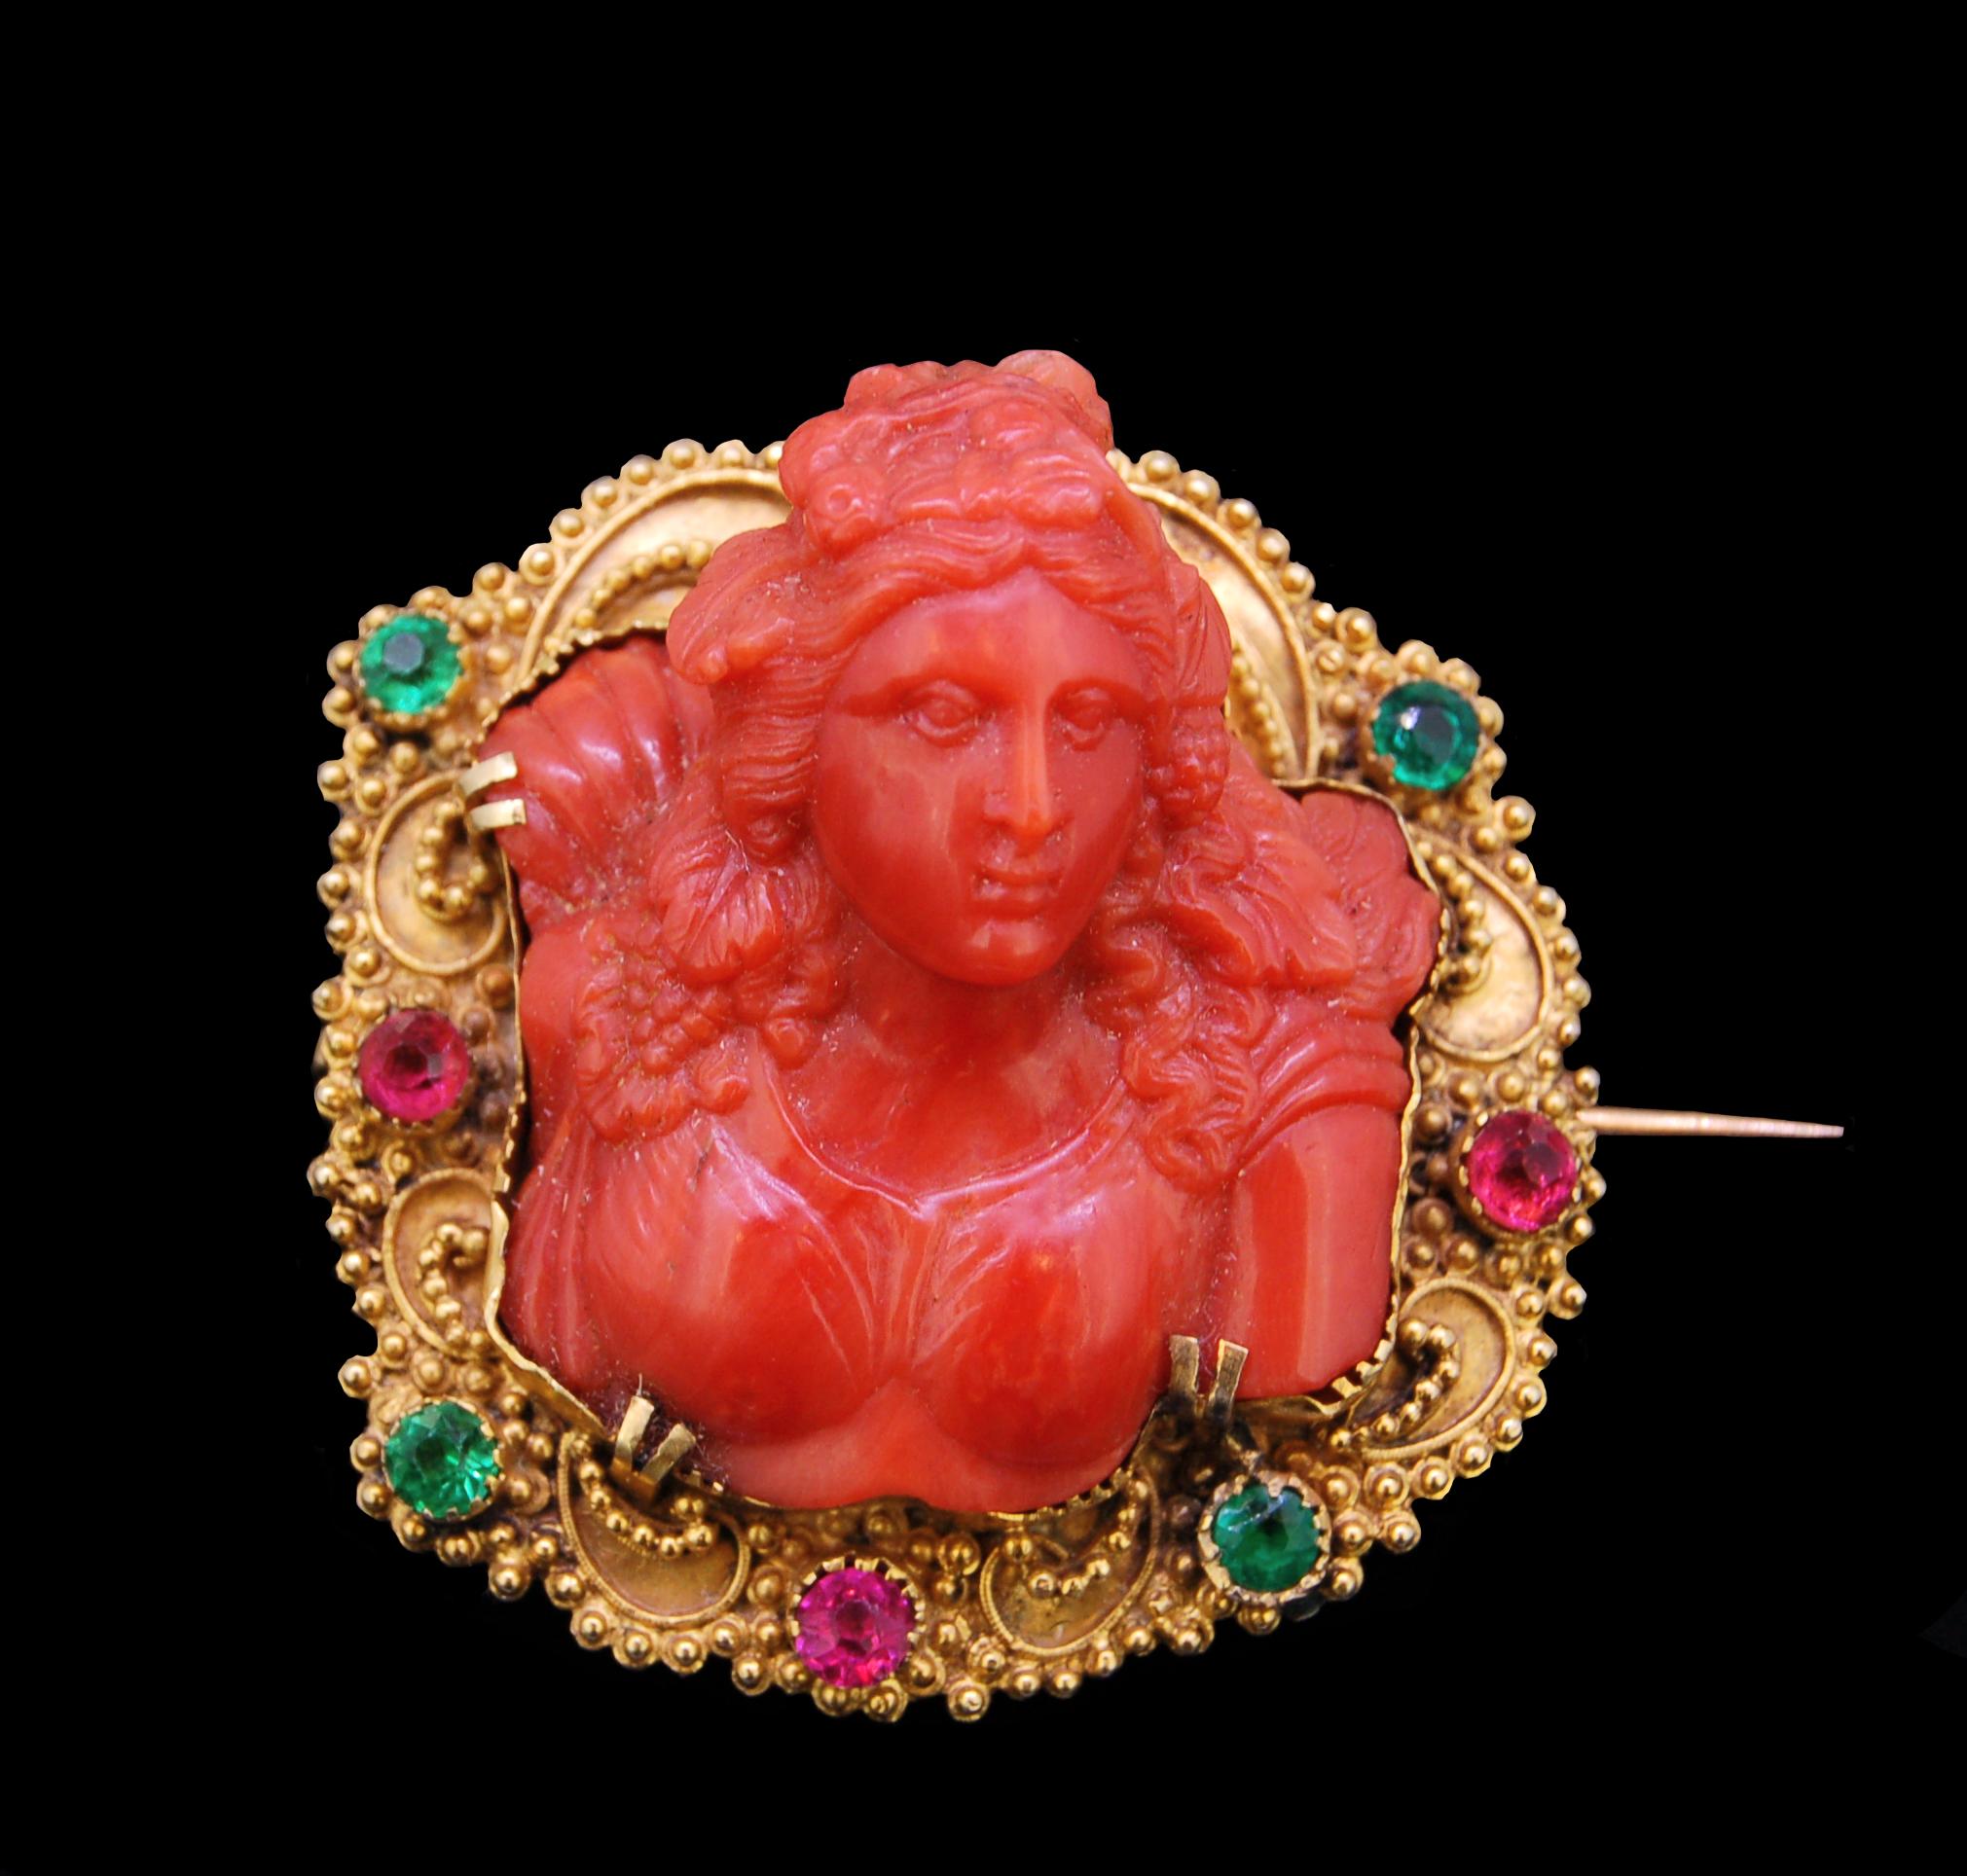 IMPORTANT ANTIQUE CARVED CORAL CAMEO BROOCH, the carving in high relief of a woman's bust. The mount set with green and red stones and decorated with granulation balls. Cameo probably 17th/18th century. L. 4.3 cm. H. cameo relief 1.9 cm. 15.7 grams.